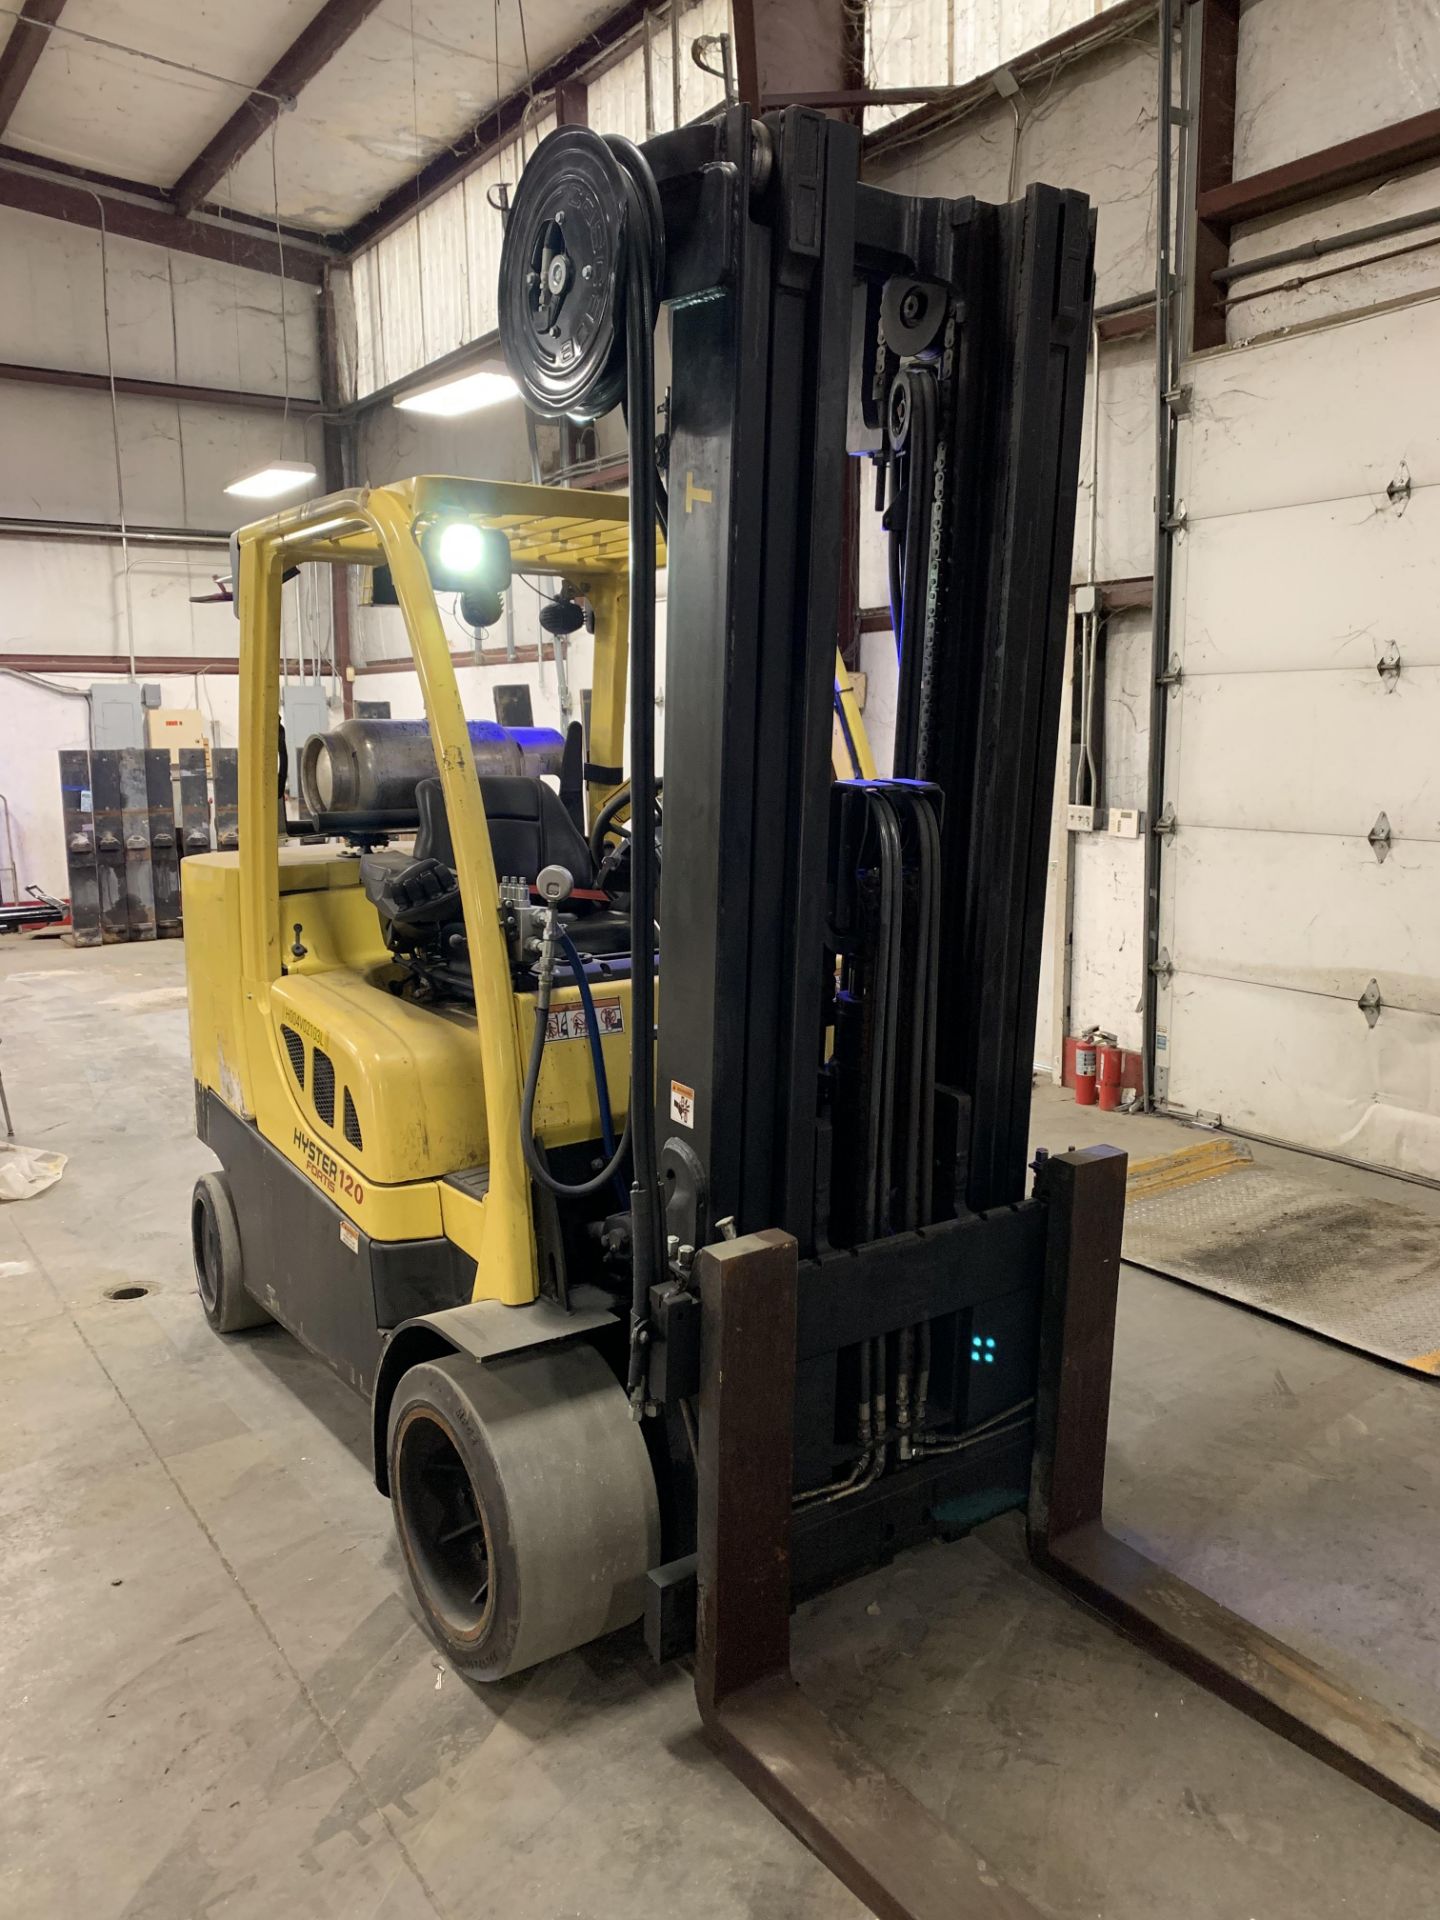 2013 HYSTER 12,000-LB. CAPACITY FORKLIFT, MOD: S120FT, LPG, 3-STAGE MAST, 213" LIFT, SOLID TIRES - Image 2 of 9